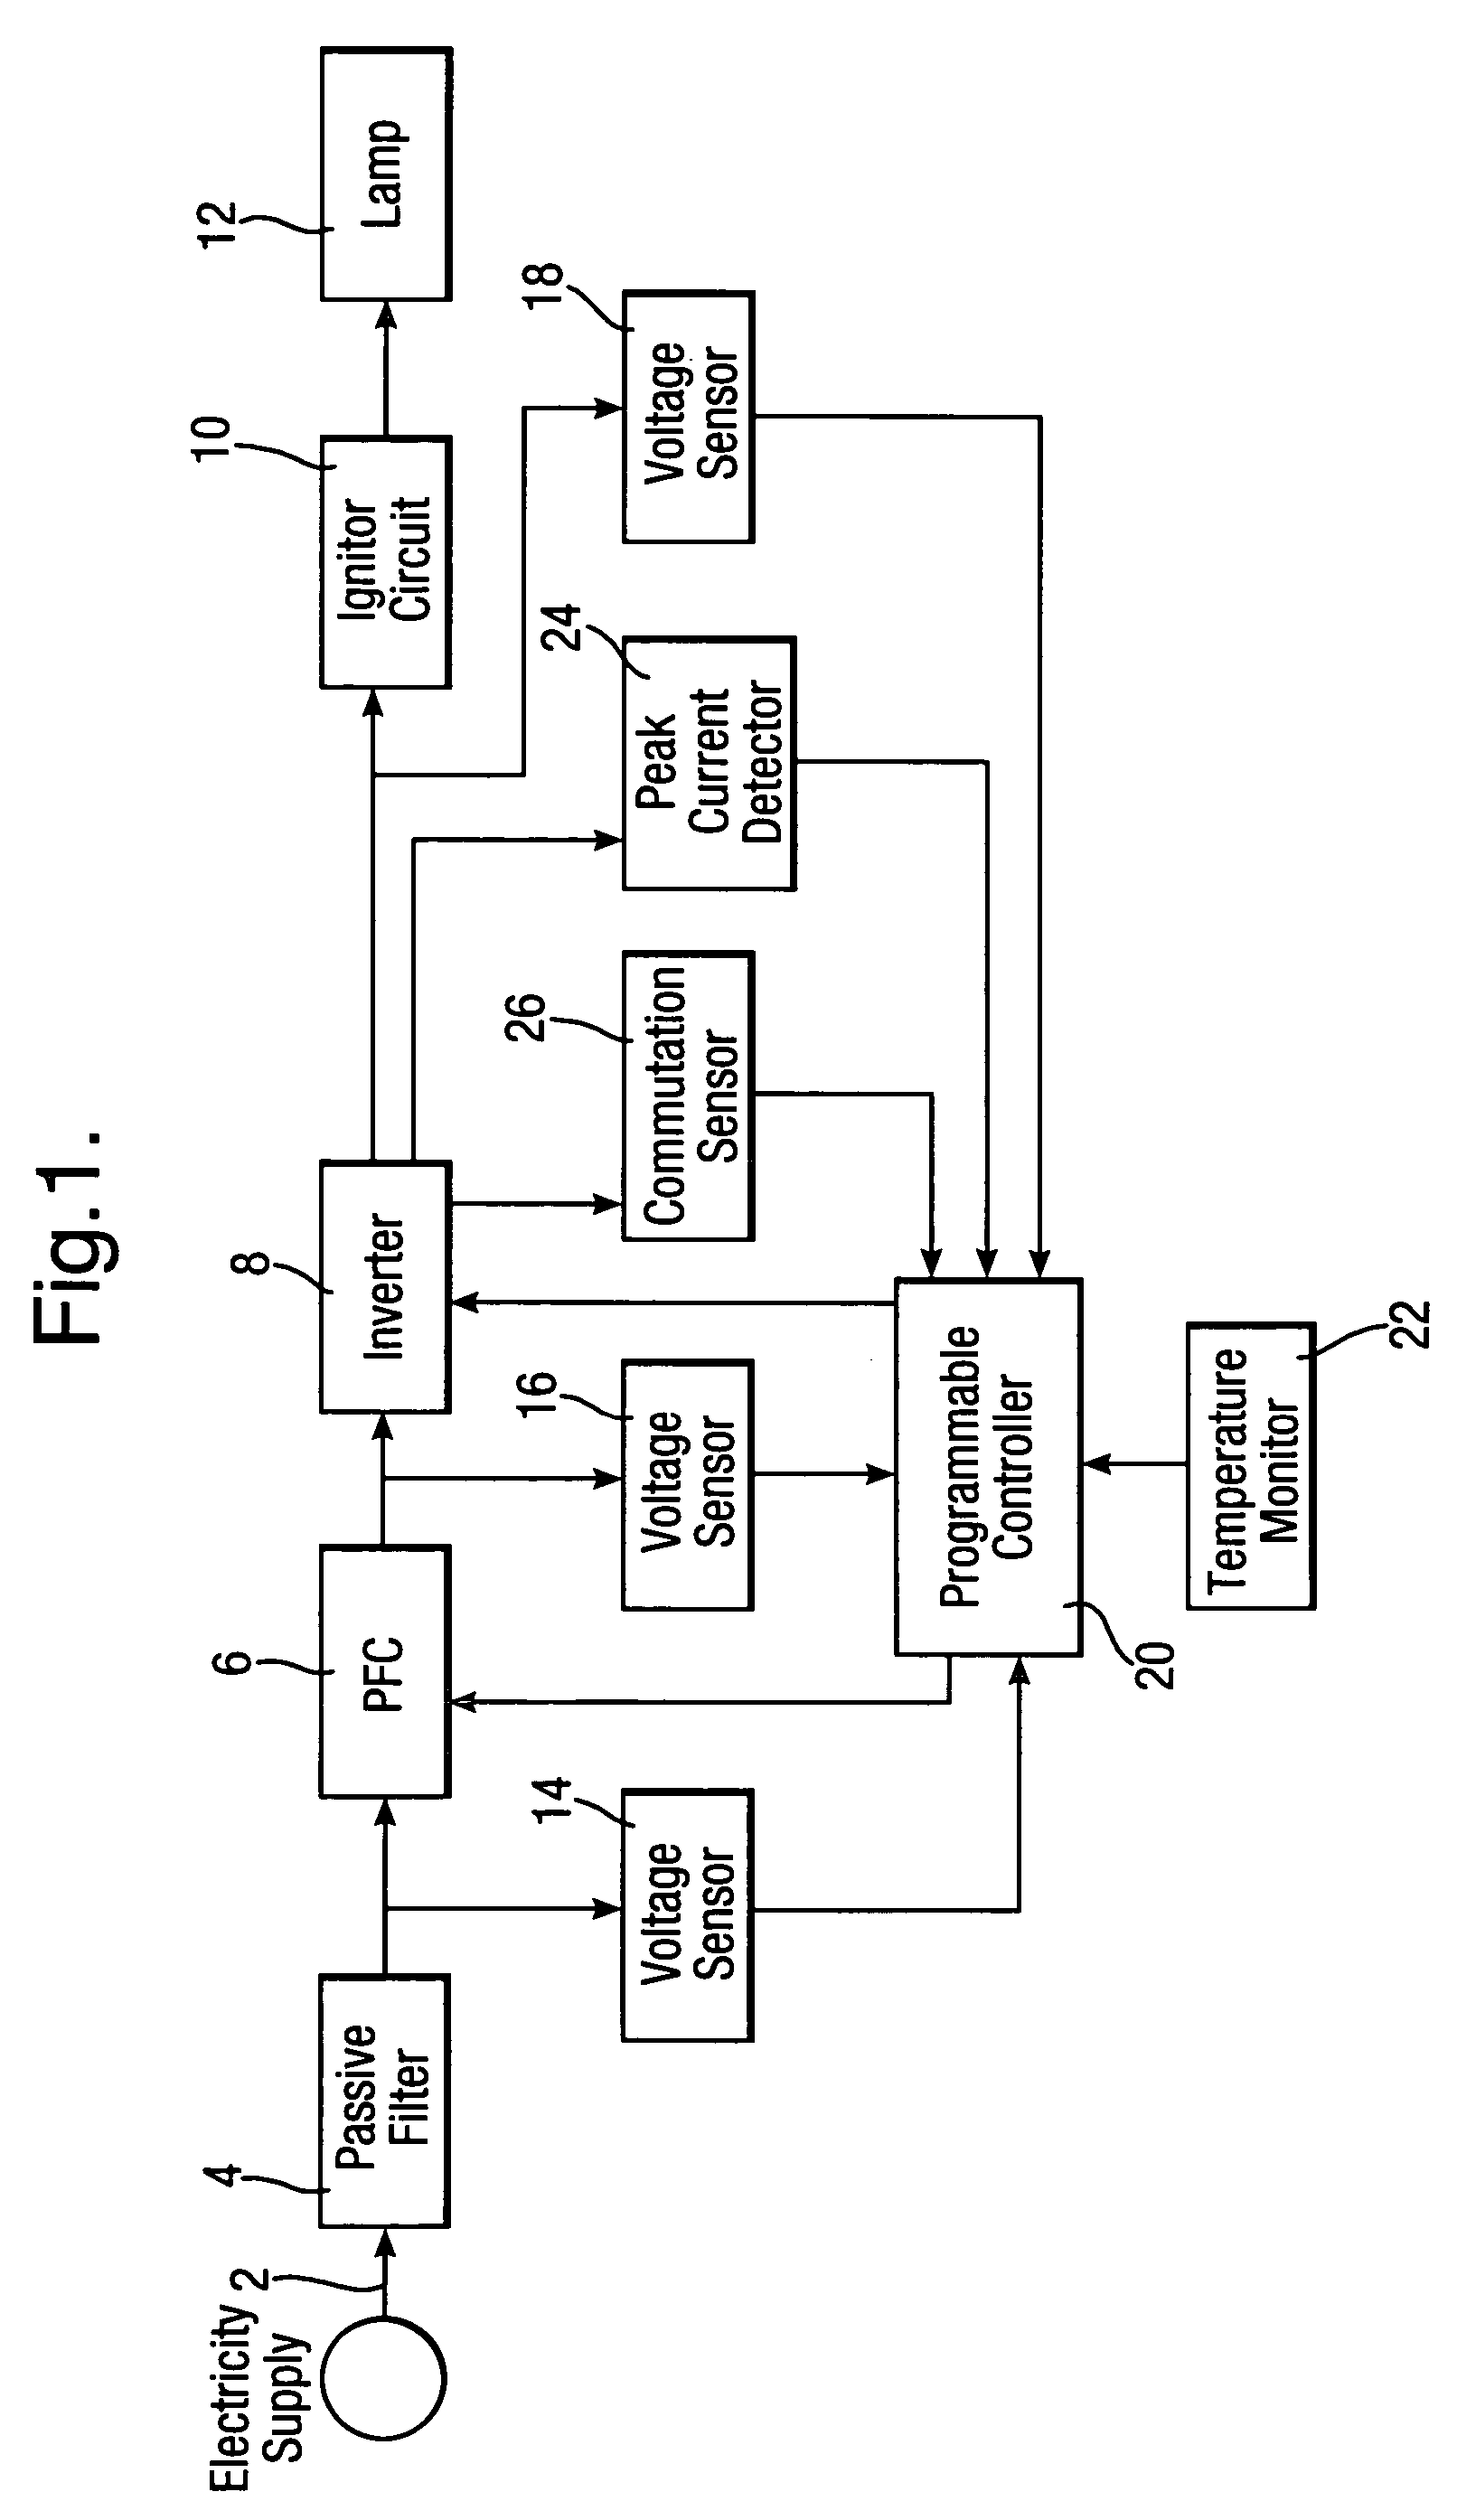 Process for operating a discharge lamp